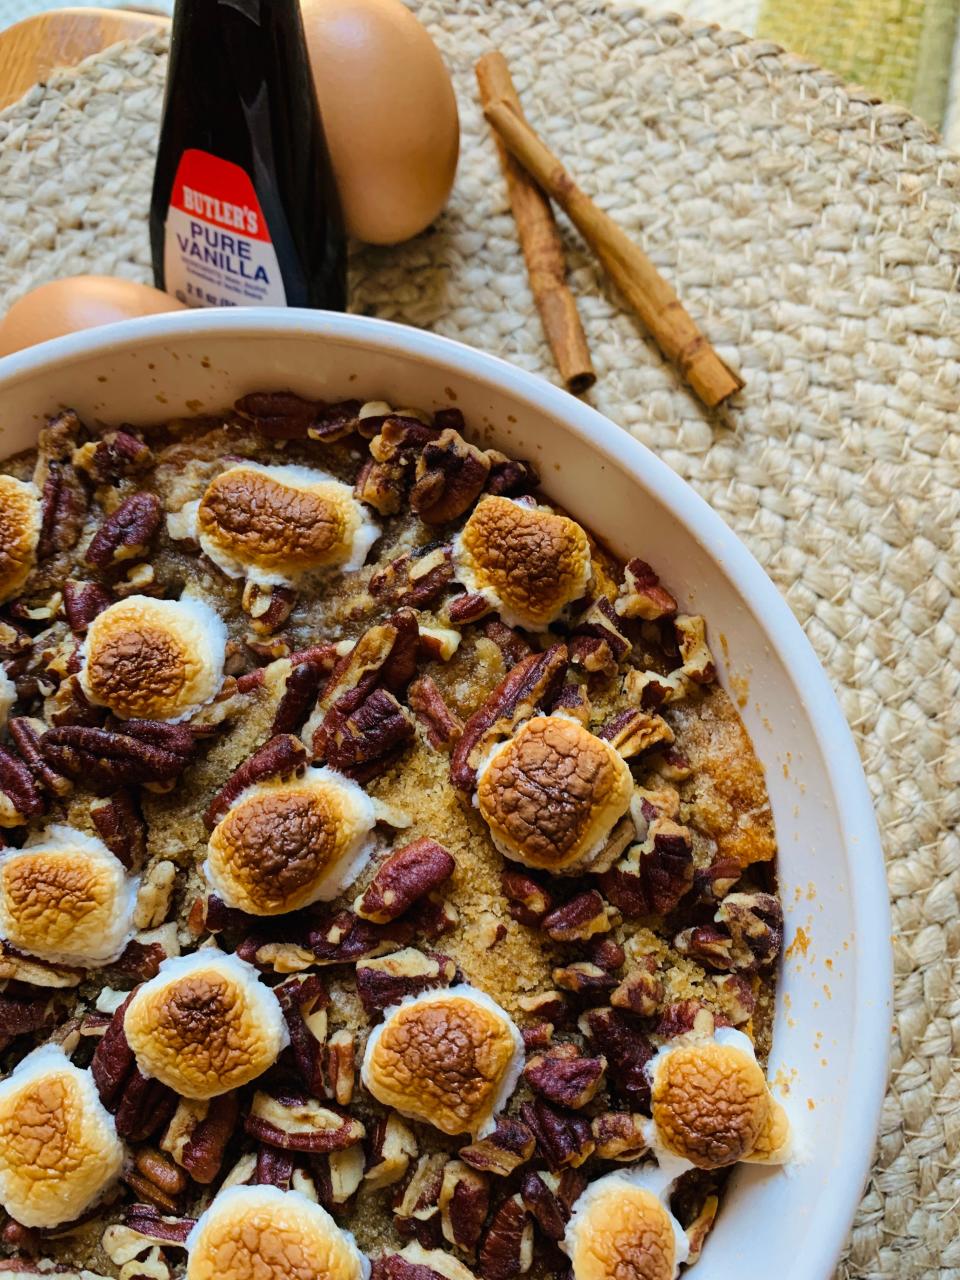 This sweet potato casserole is the perfect make-ahead side.